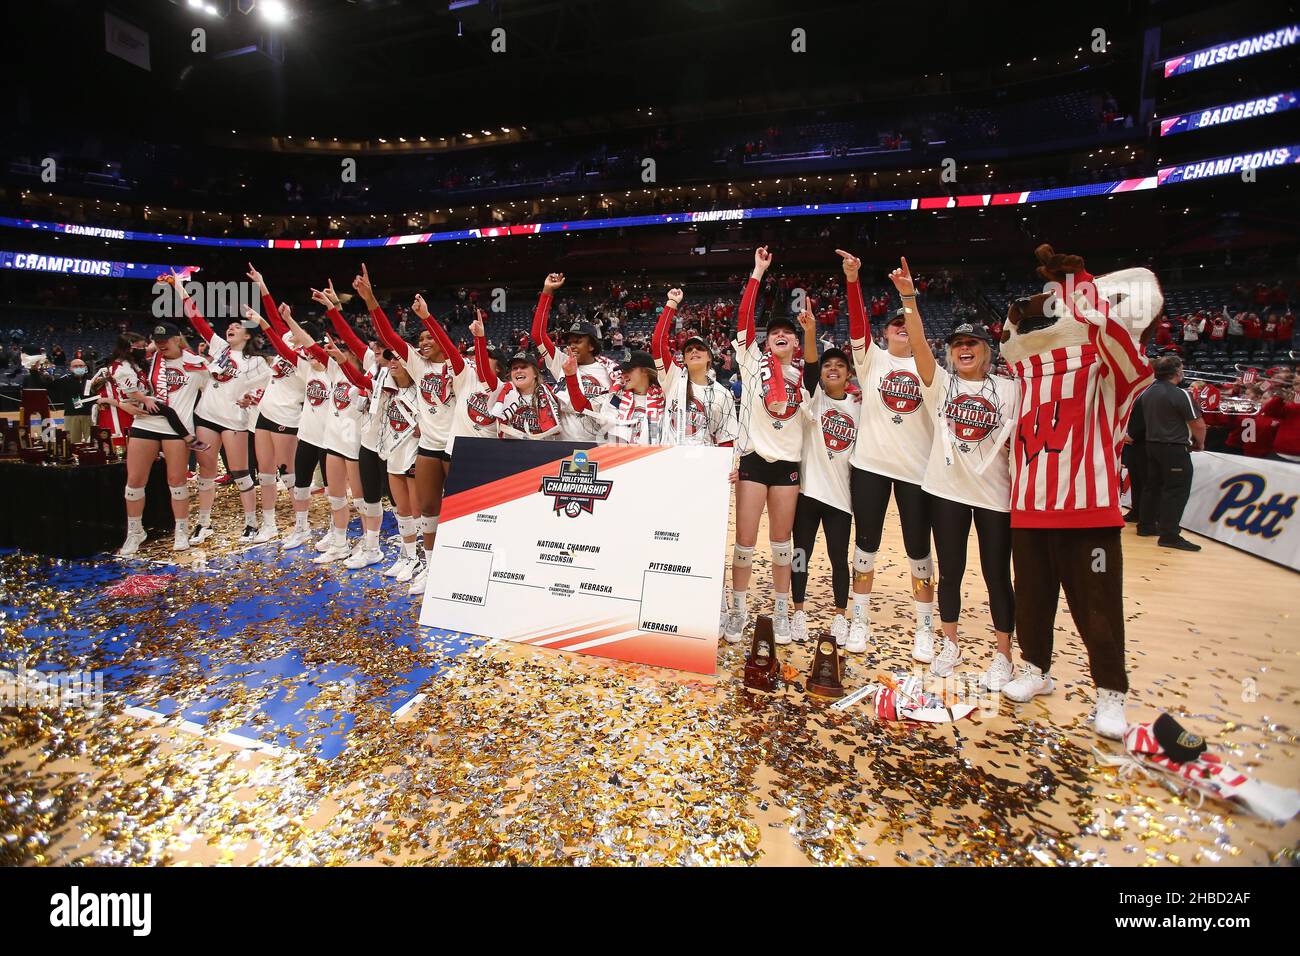 columbus-oh-usa-18th-dec-2021-columbus-oh-20211218-wisconsin-players-celebrate-winning-the-title-over-nebraska-in-5-sets-in-the-division-1-ncaa-womens-volleyball-championship-played-at-nationwide-arena-in-columbus-oh-photo-by-wally-nellvolleyball-magazine-credit-image-wally-nellzuma-press-wire-credit-zuma-press-incalamy-live-news-2HBD2AF.jpg